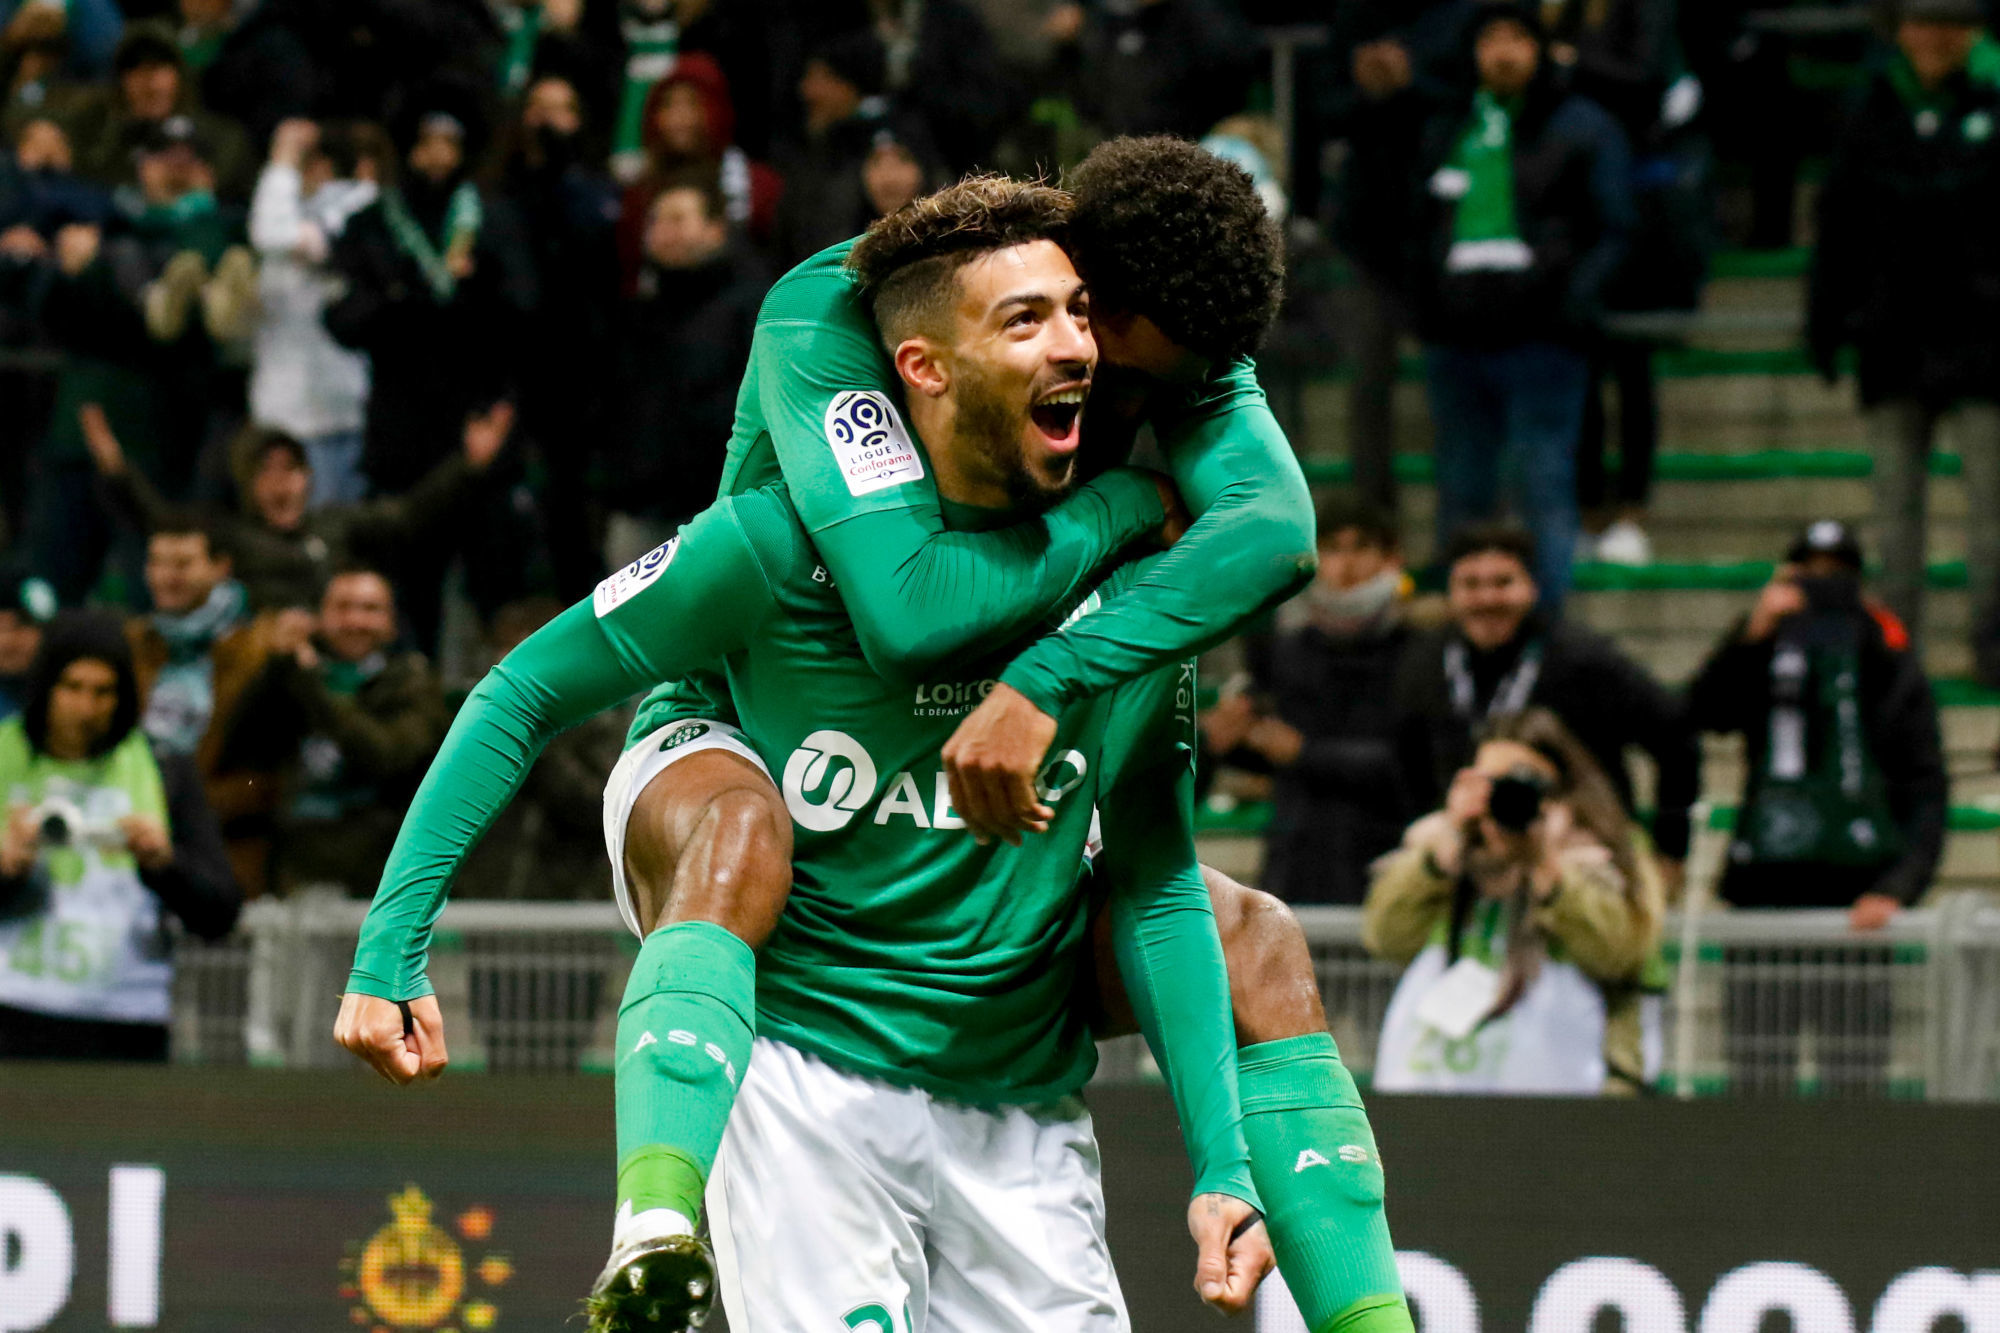 Denis BOUANGA of Saint Etienne celebrates his goal with Wesley FOFANA of Saint Etienne during the Ligue 1 match between AS Saint-Etienne and OGC Nice at Stade Geoffroy-Guichard on December 4, 2019 in Saint-Etienne, France. (Photo by Romain Biard/Icon Sport) - Denis BOUANGA - Wesley FOFANA - Stade Geoffroy-Guichard - Saint Etienne (France)